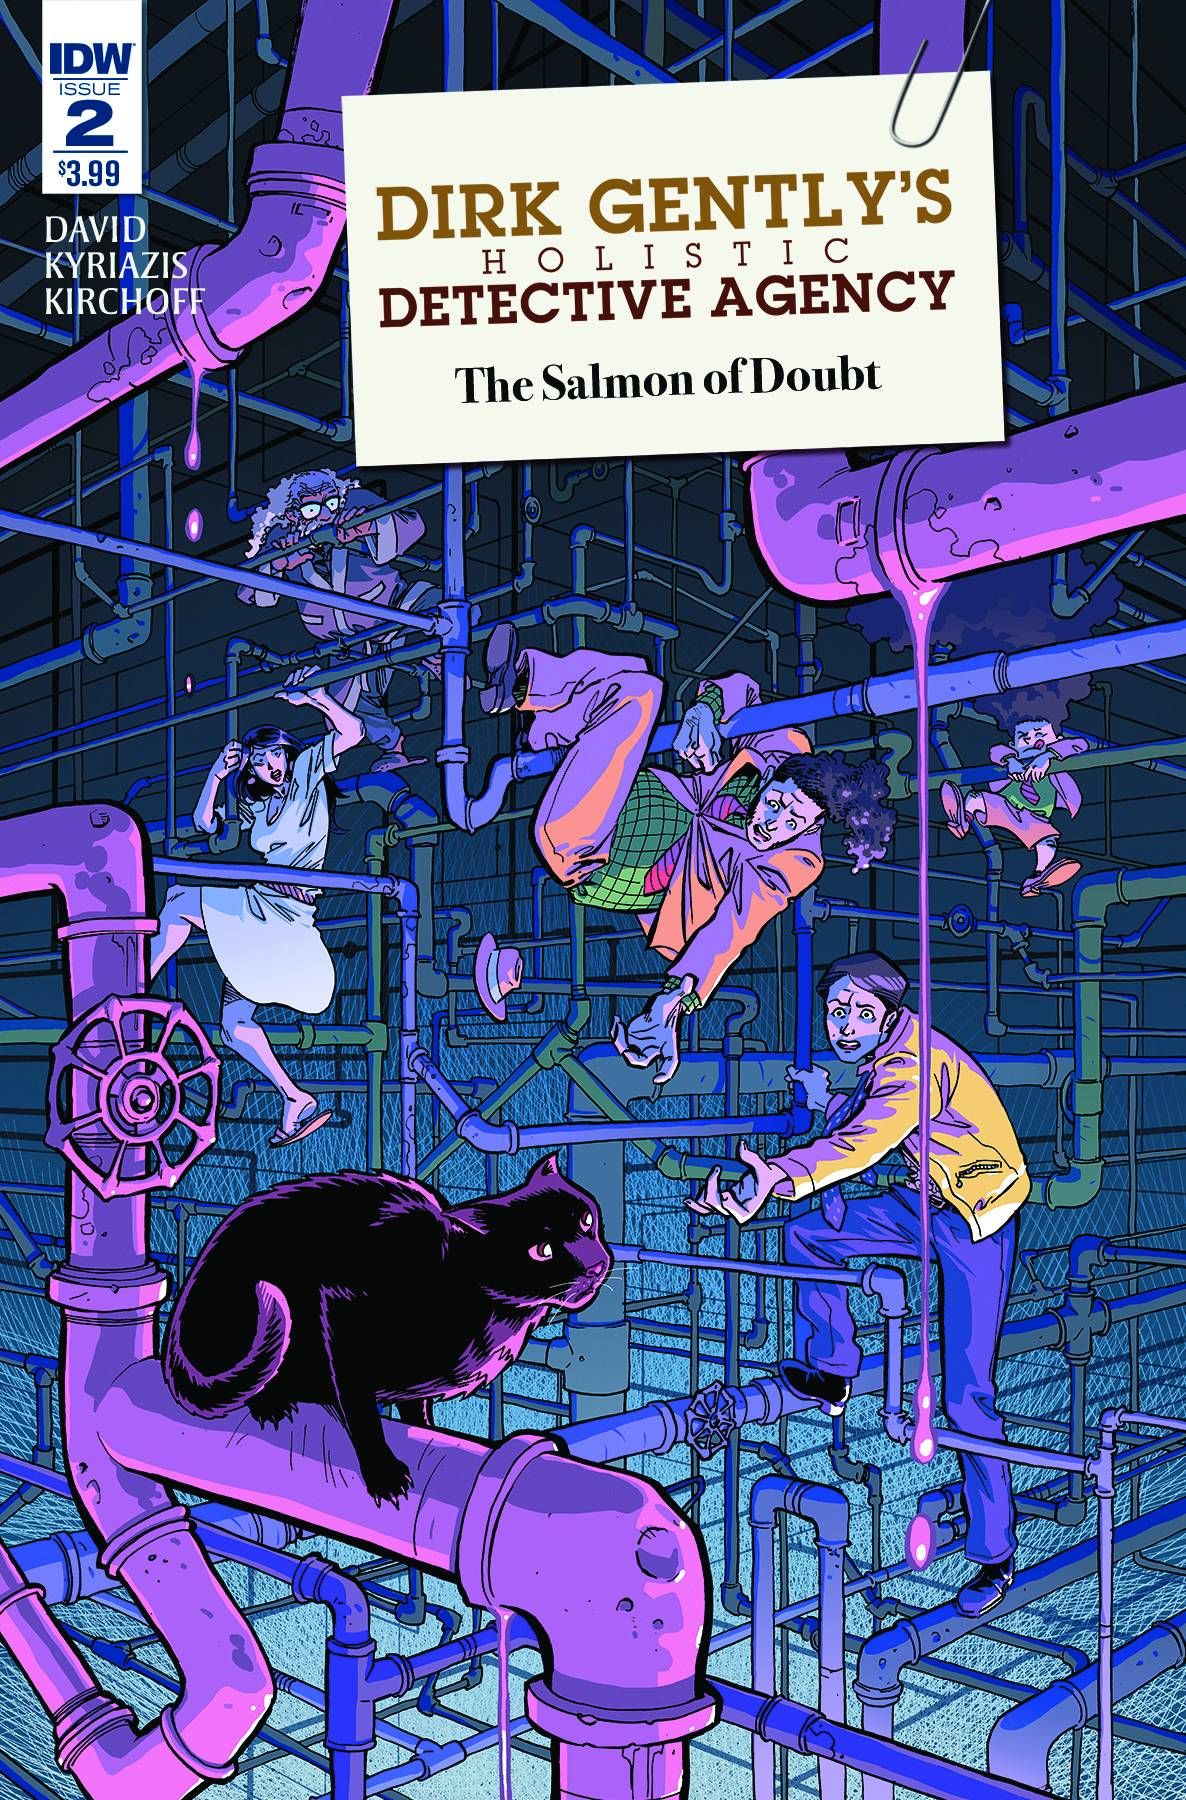 Dirk Gently's Holistic Detective Agency: Salmon of Doubt #2 Comic